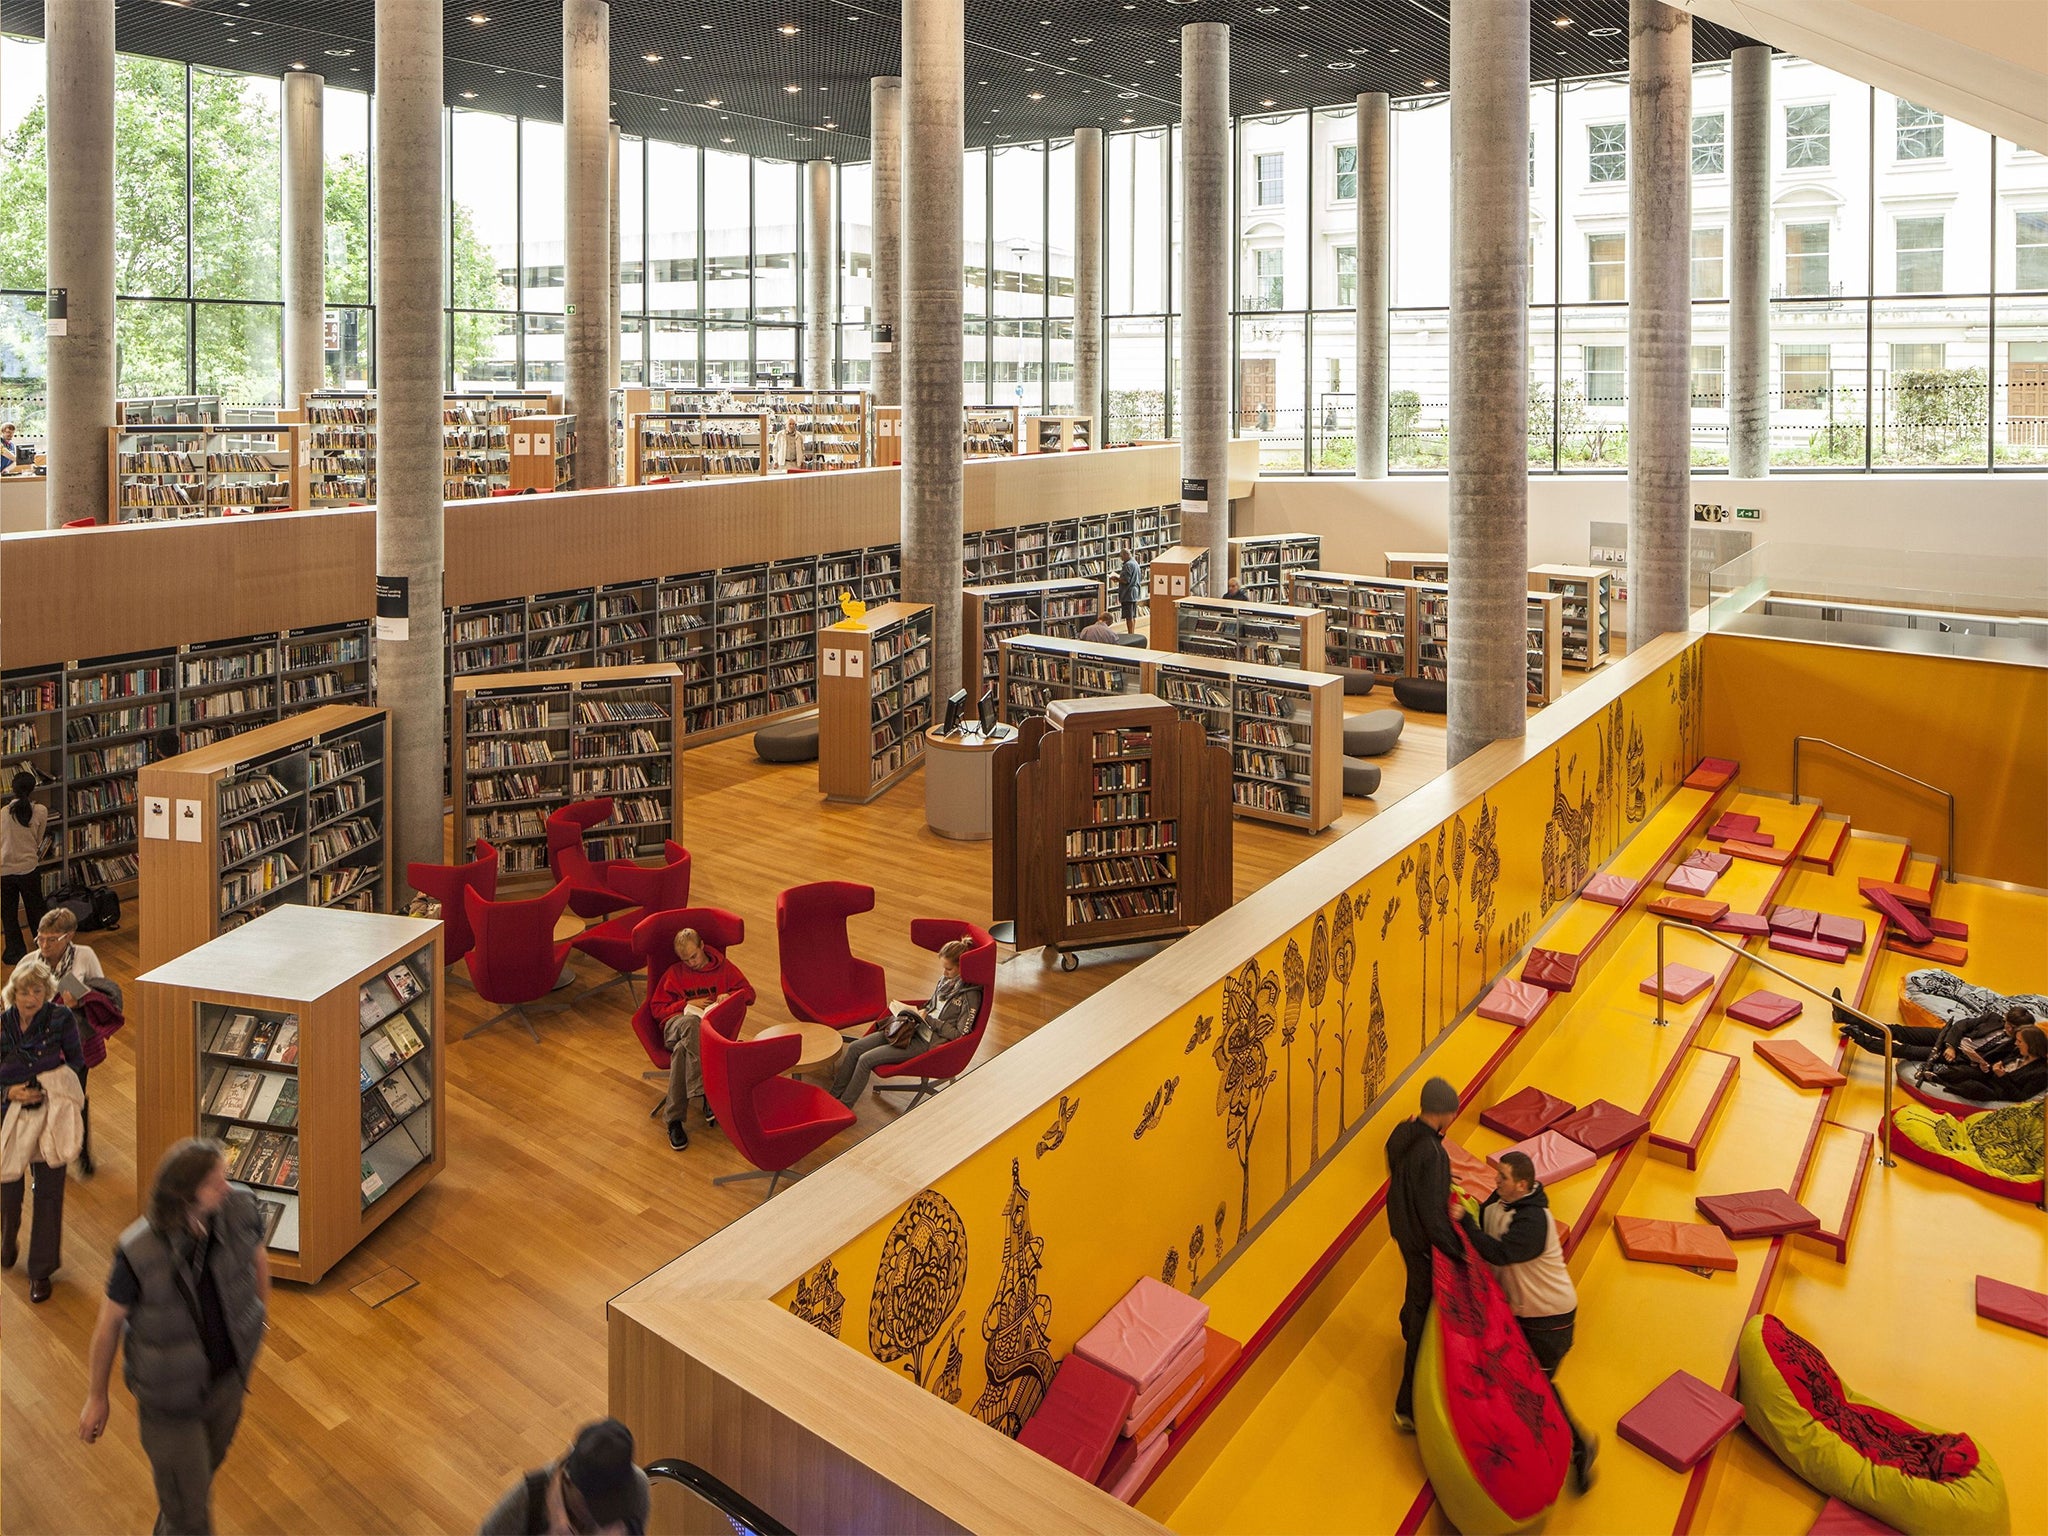 An interior view of the Library of Birmingham, described as having 'shaken the traditional perception of a library'